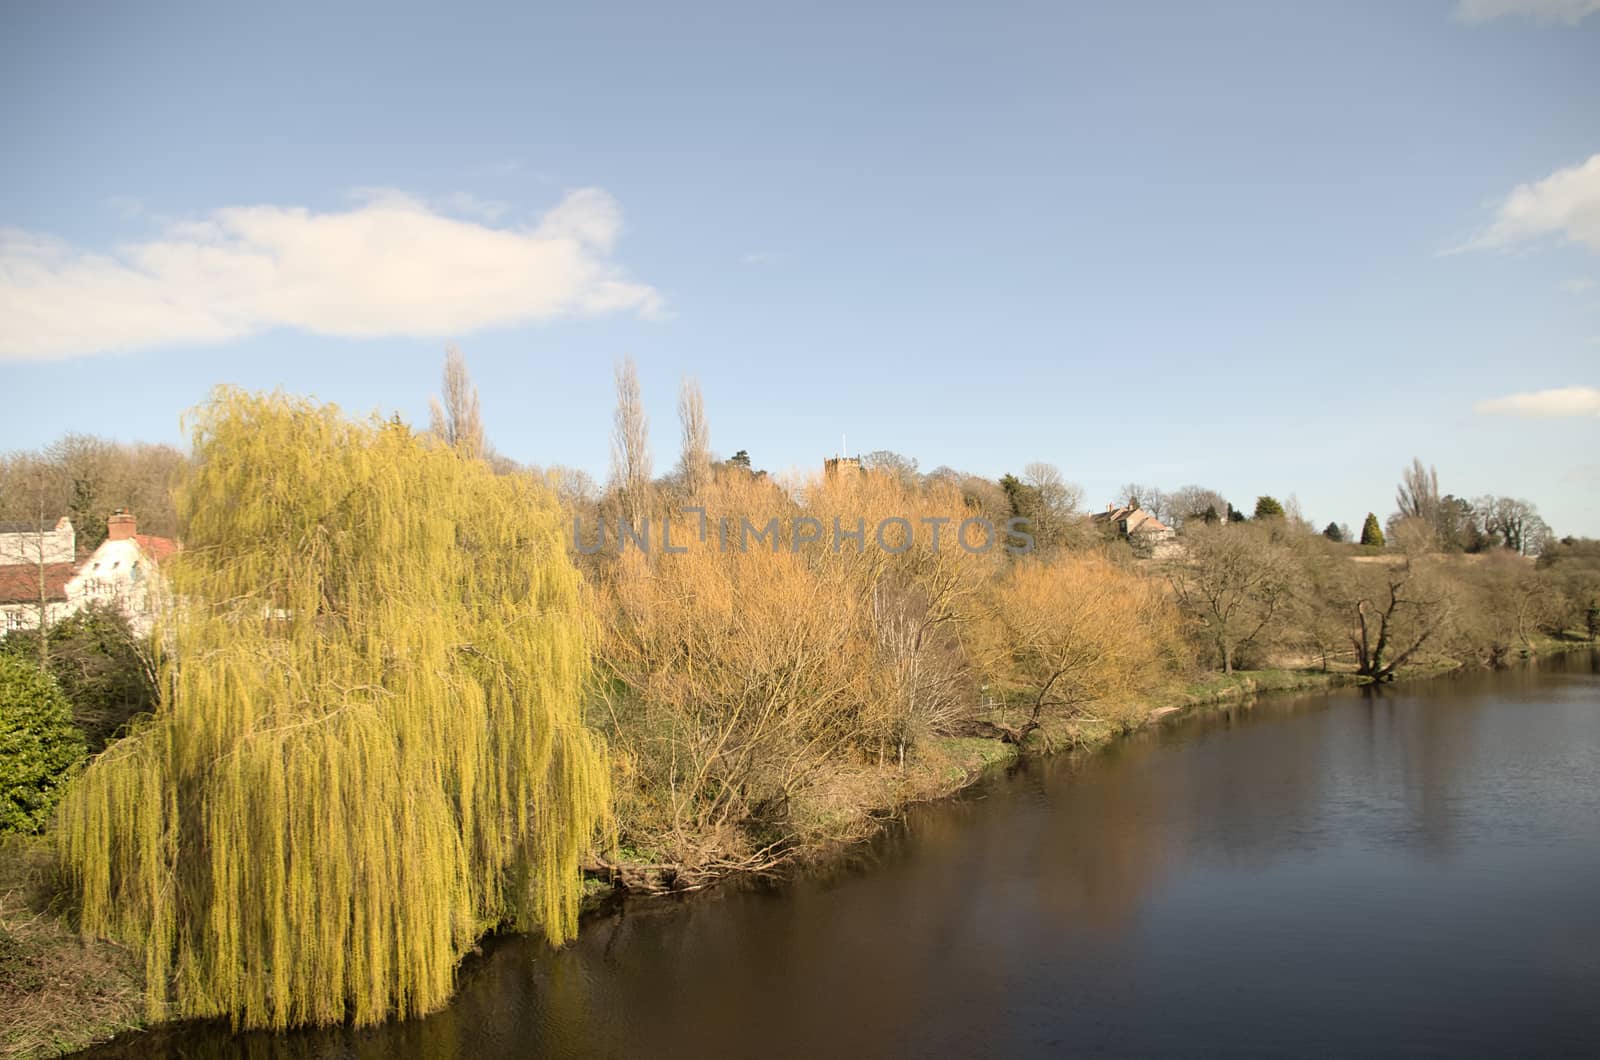 Banks of the River Tees in Yarm, Northern England